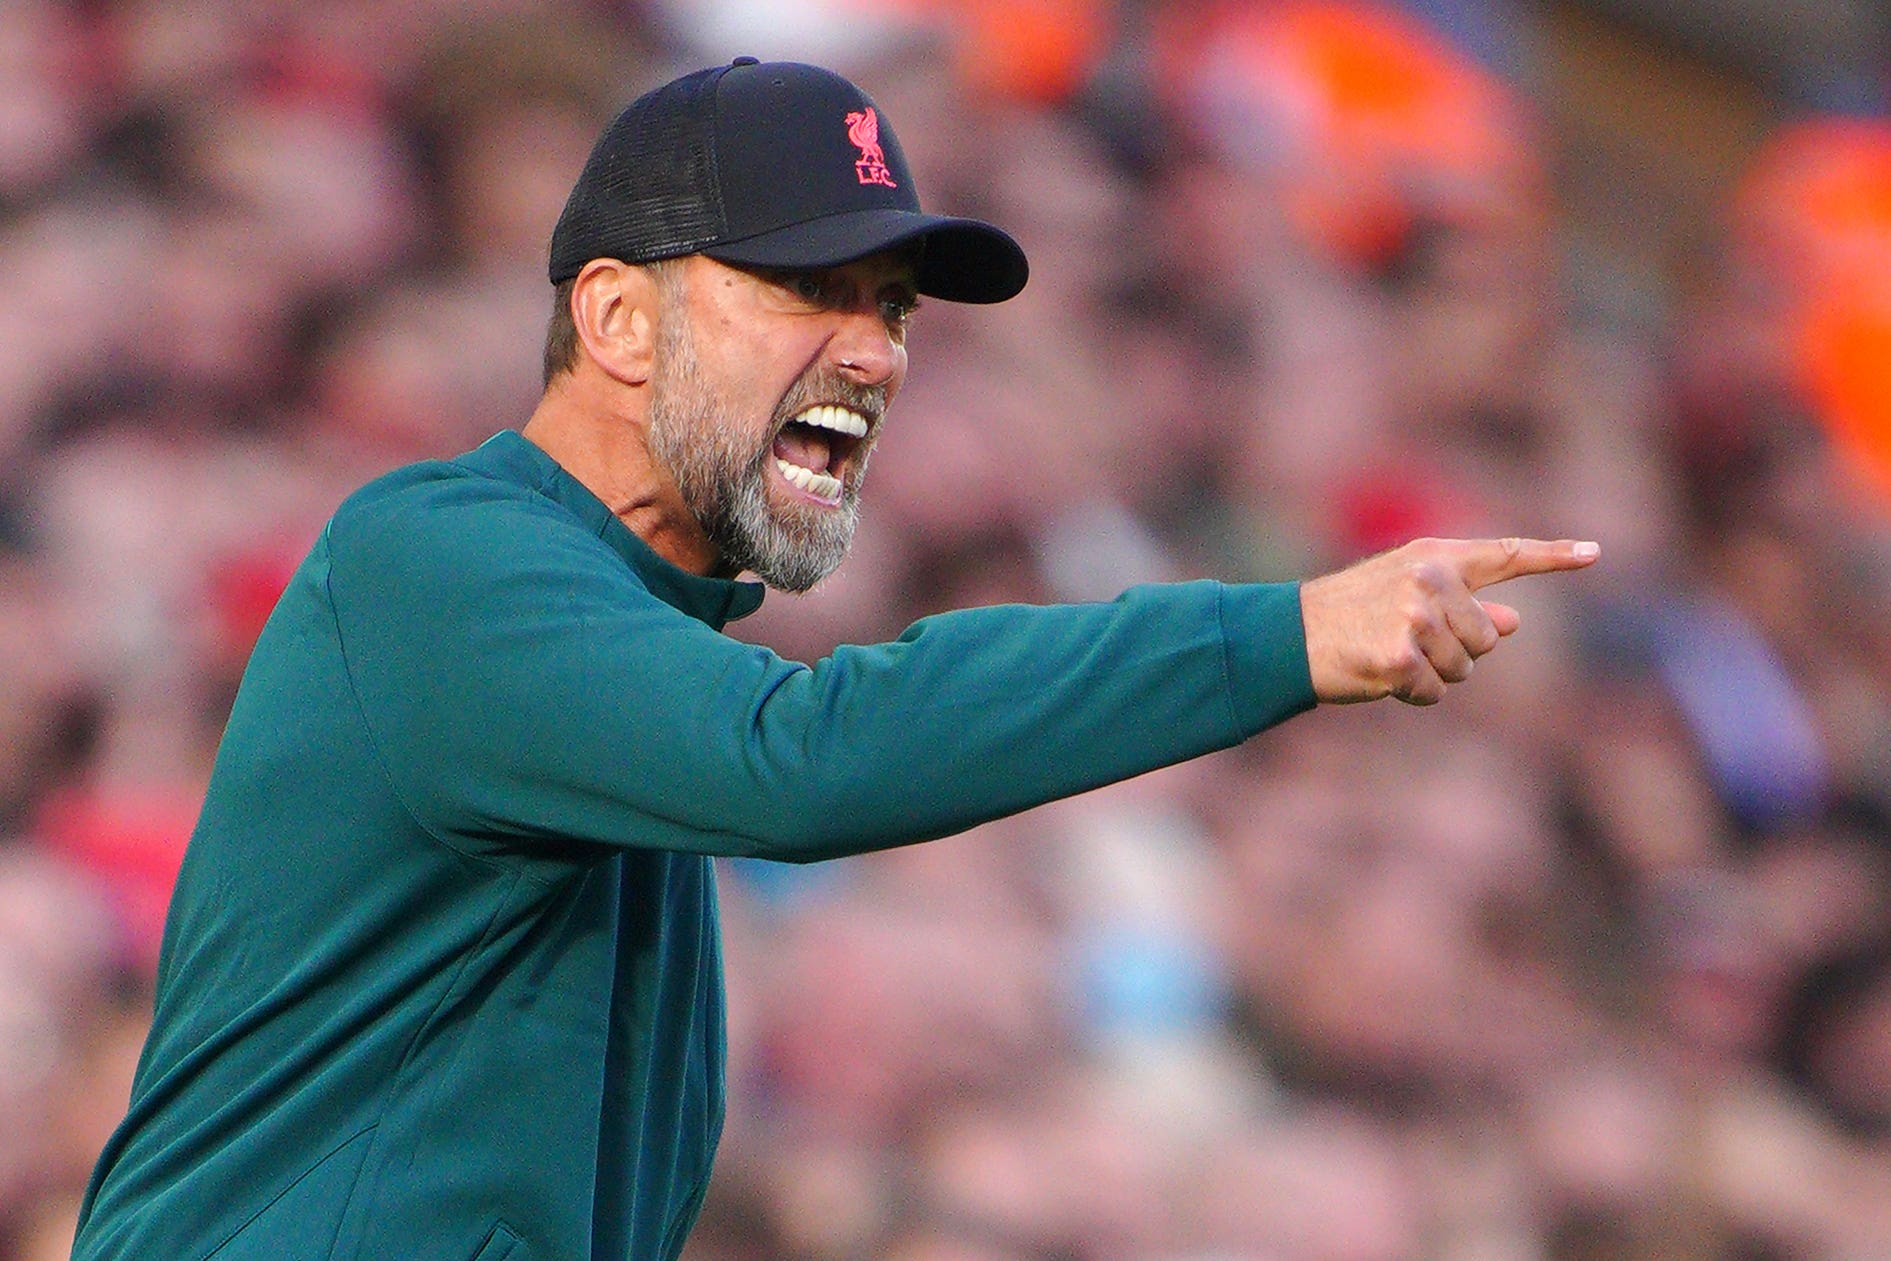 Jurgen Klopp will need to keep his cool on the touchline against Aston Villa this evening